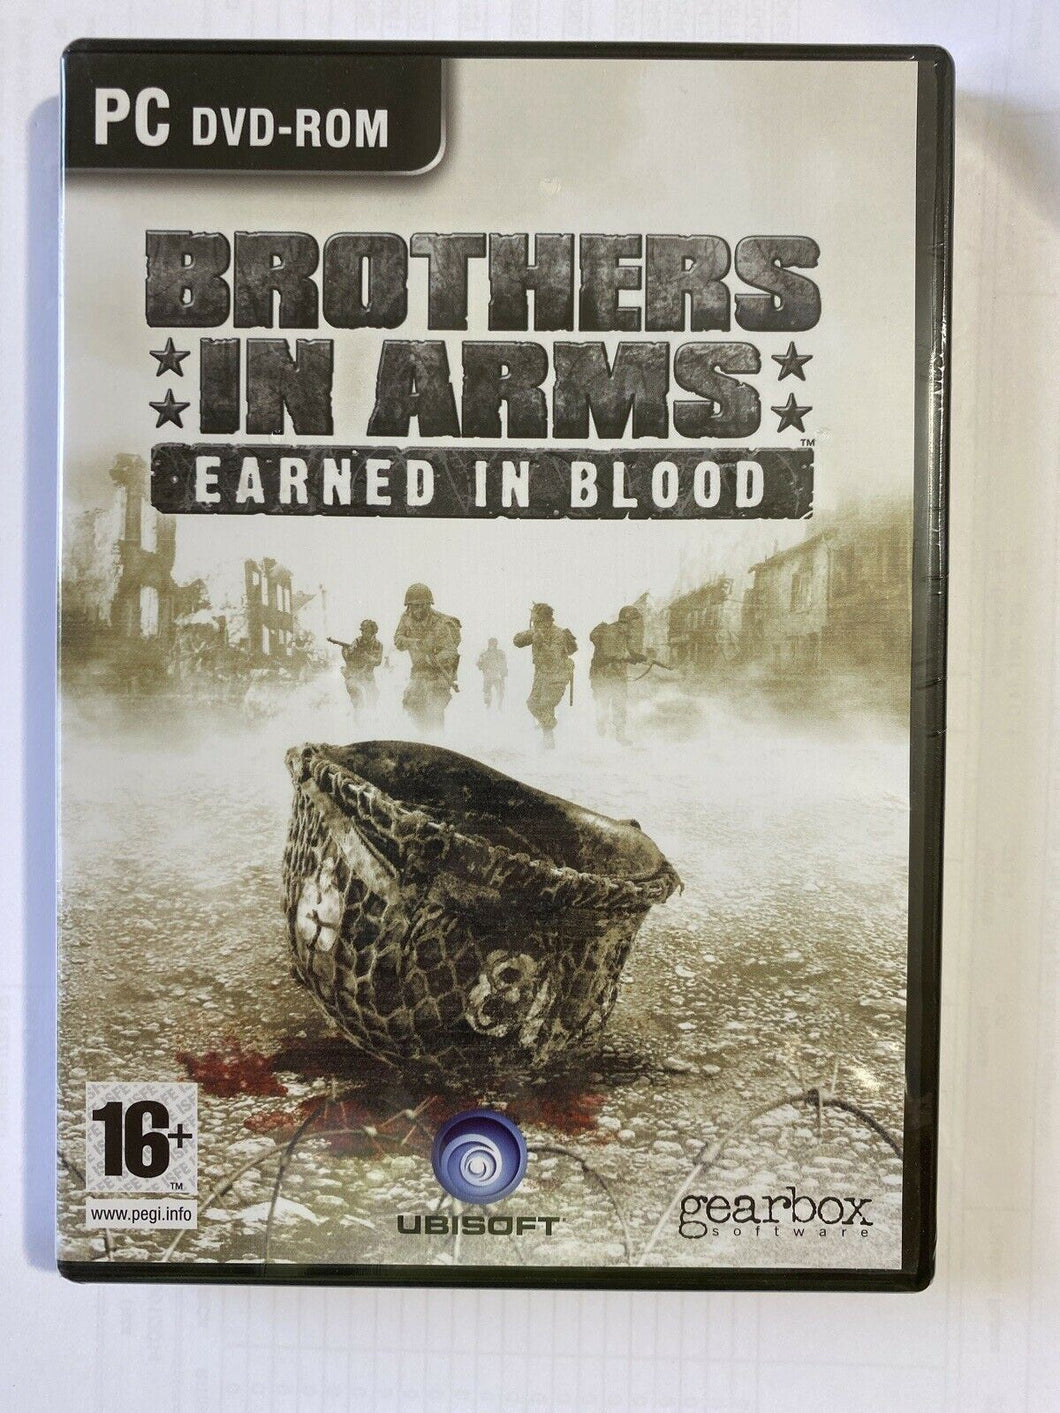 BROTHERS IN ARMS: EARNED IN BLOOD - PC DVD-ROM (2005)